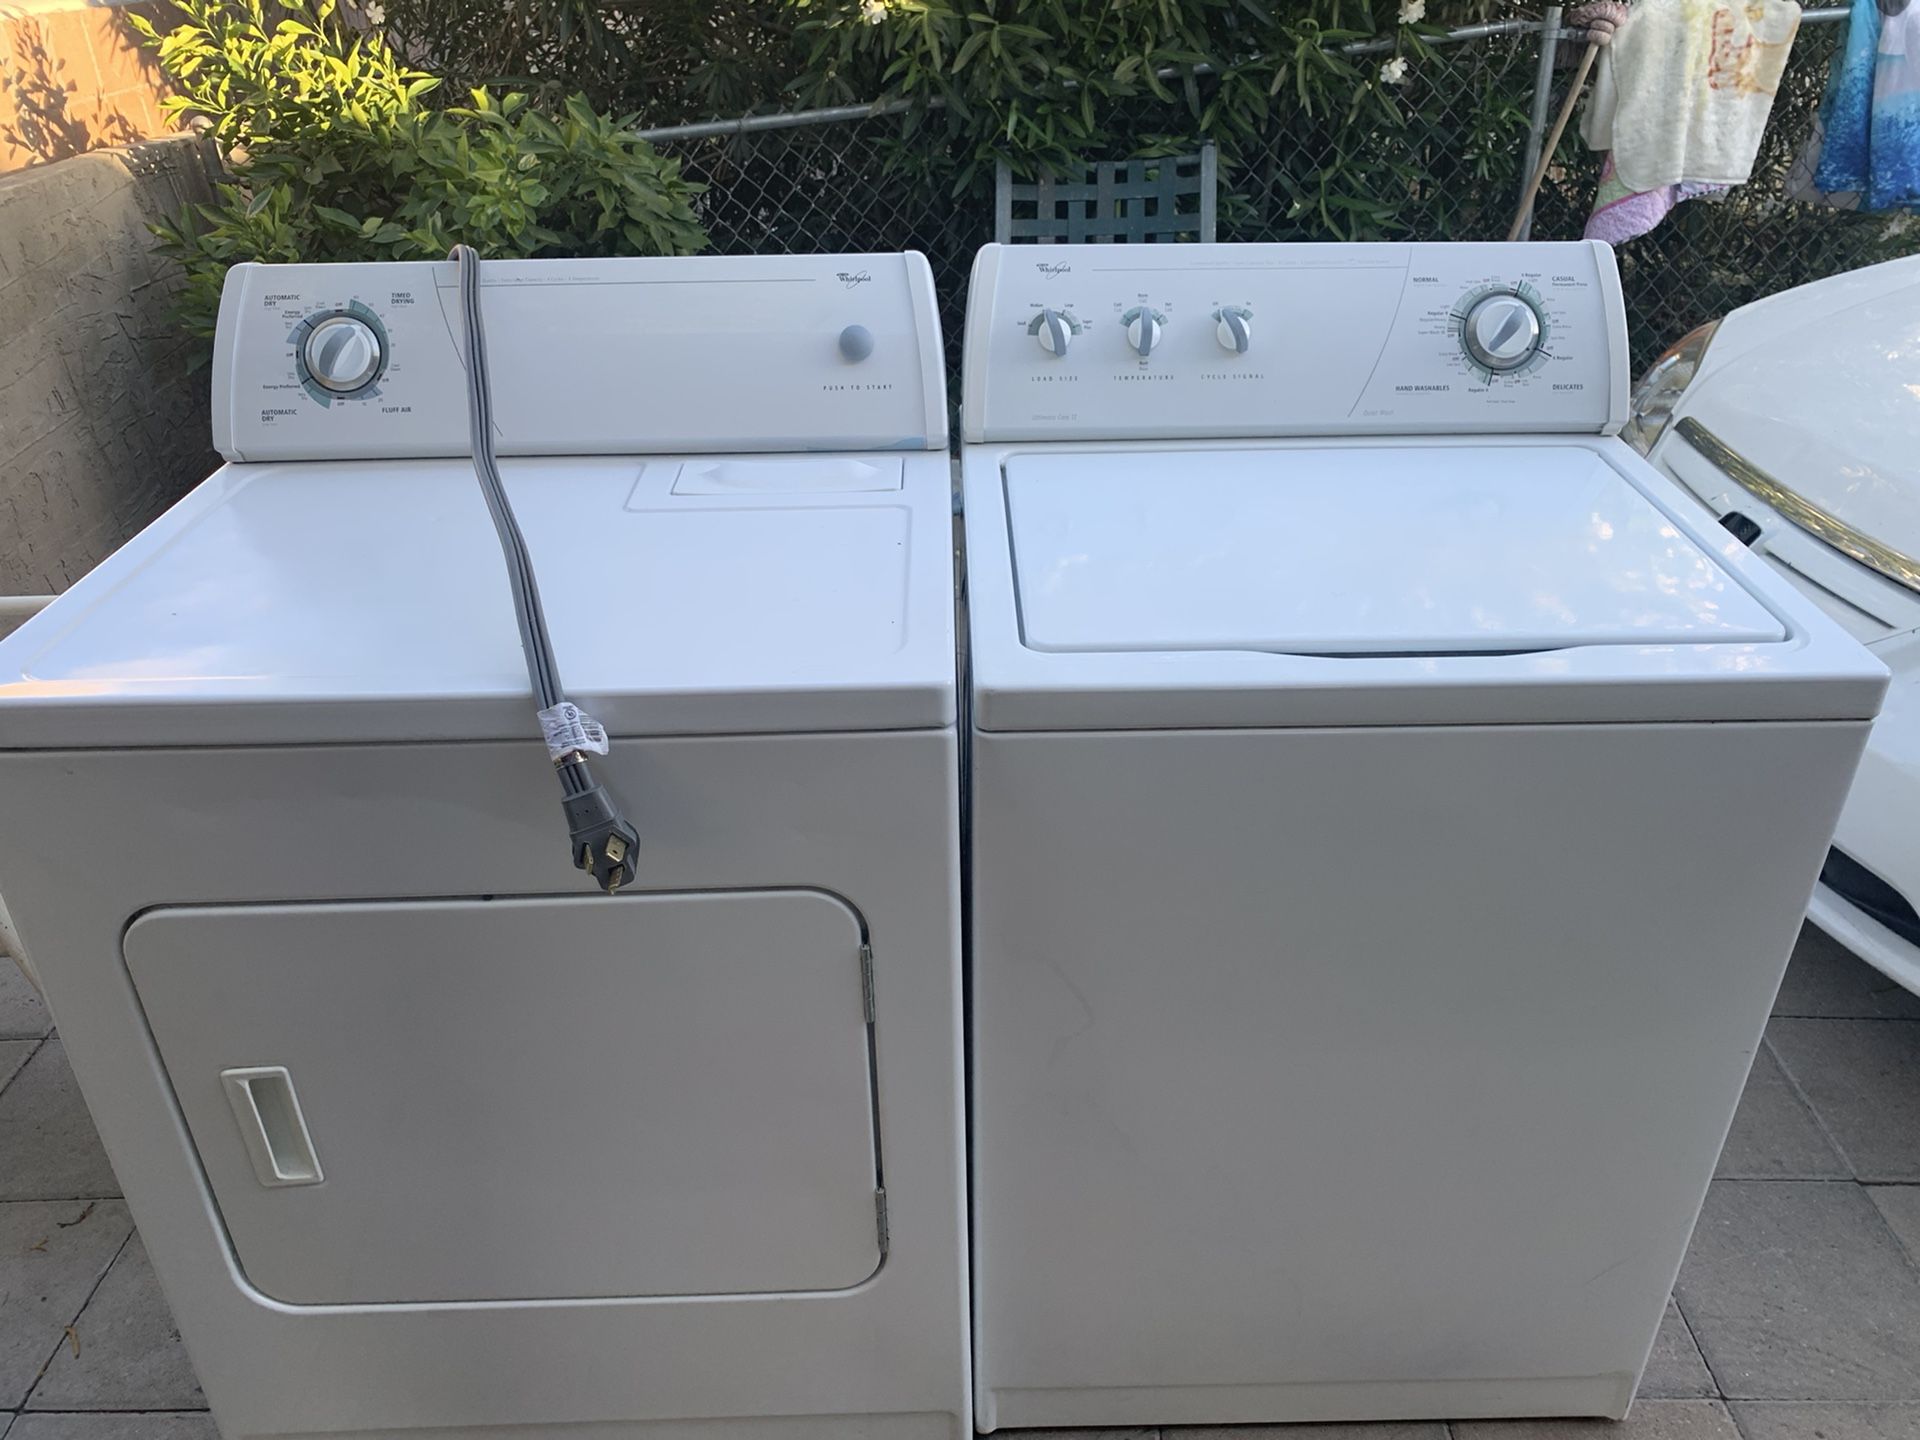 Whirlpool washer and electric dryer